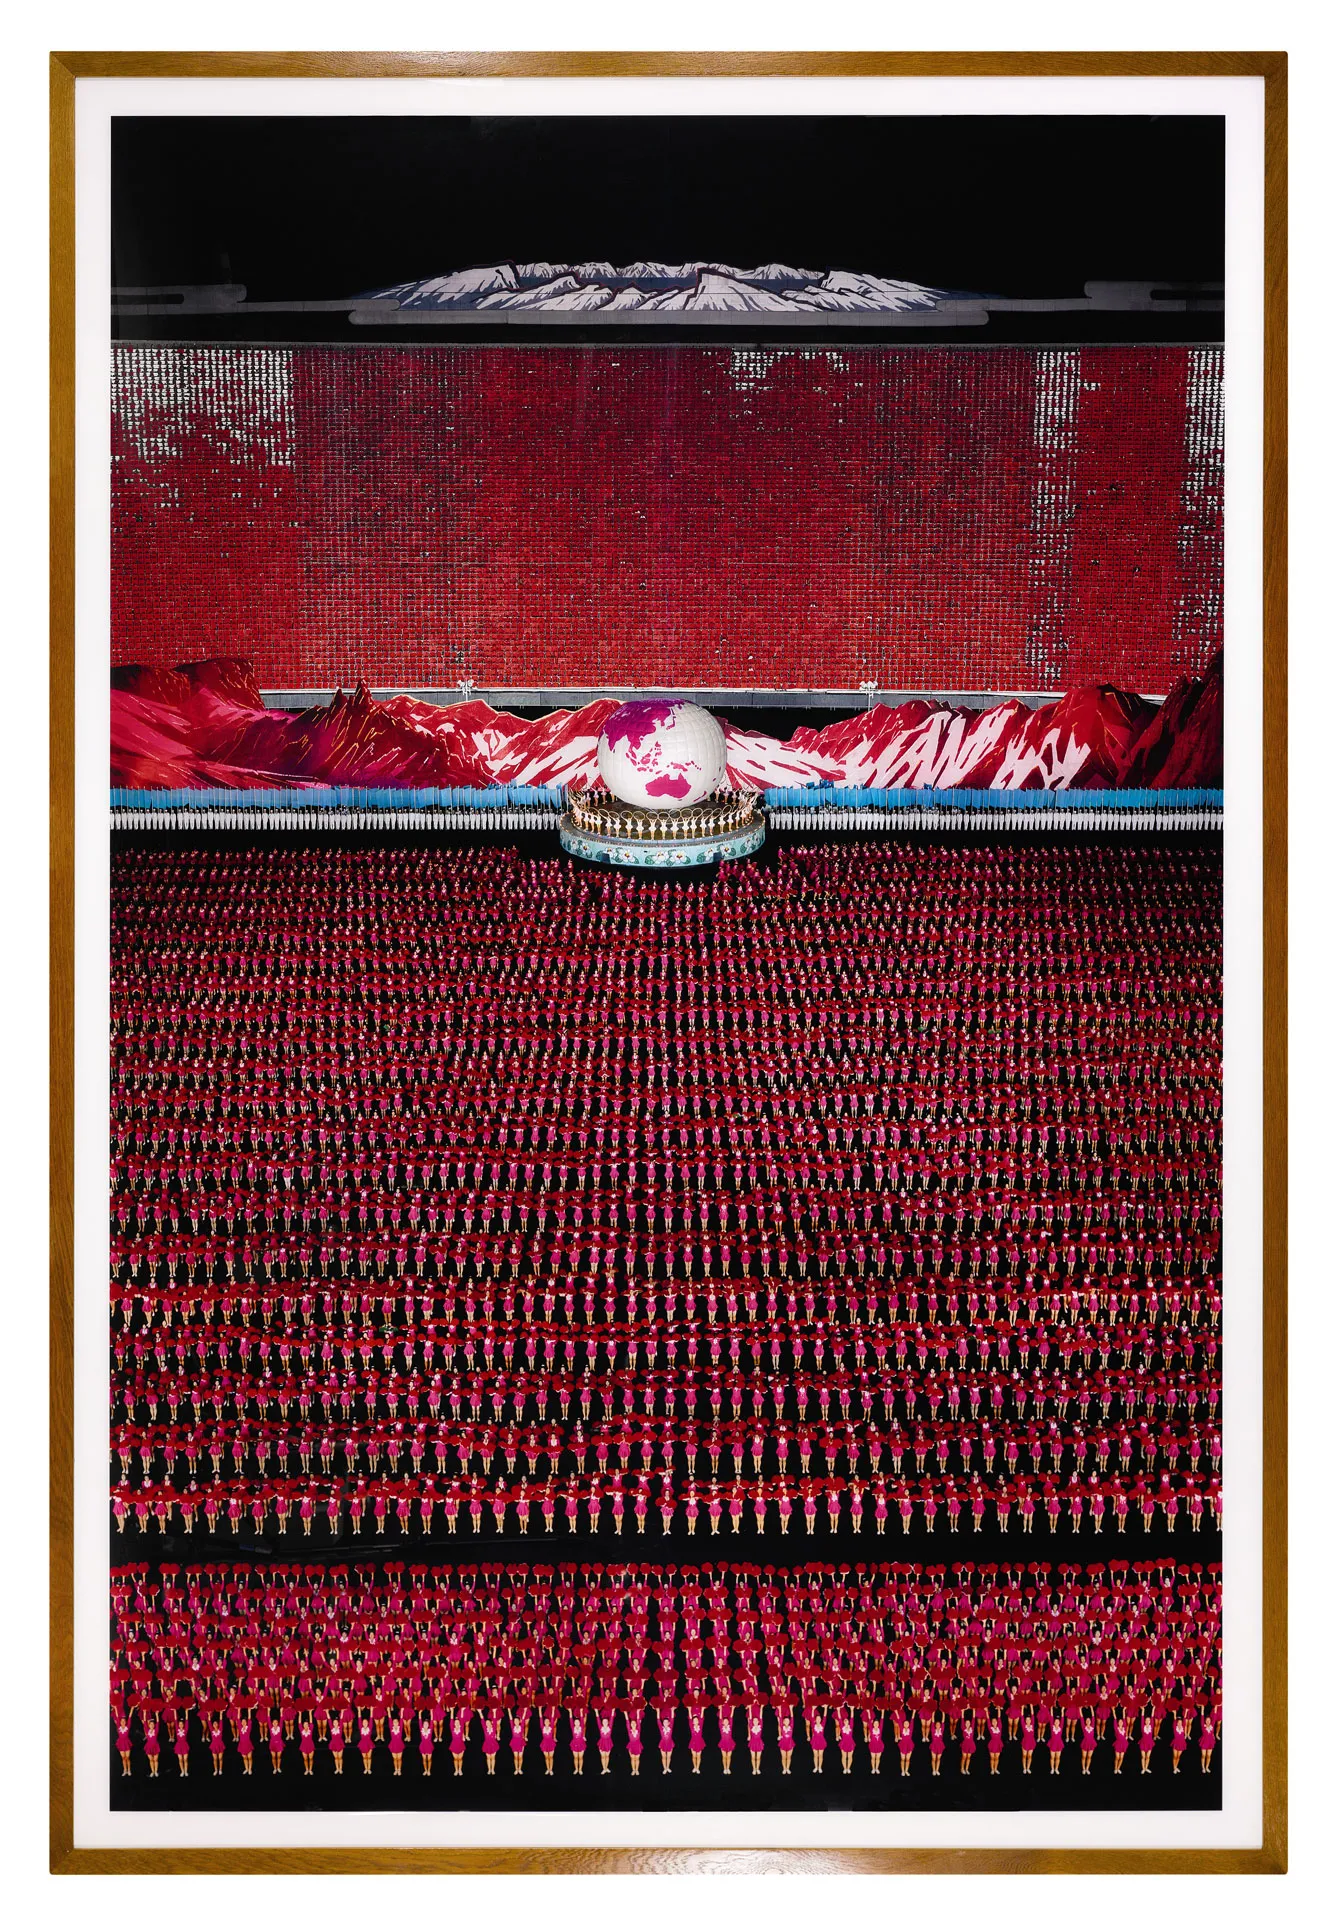 Pyongyang IV - Andreas Gursky | The Broad